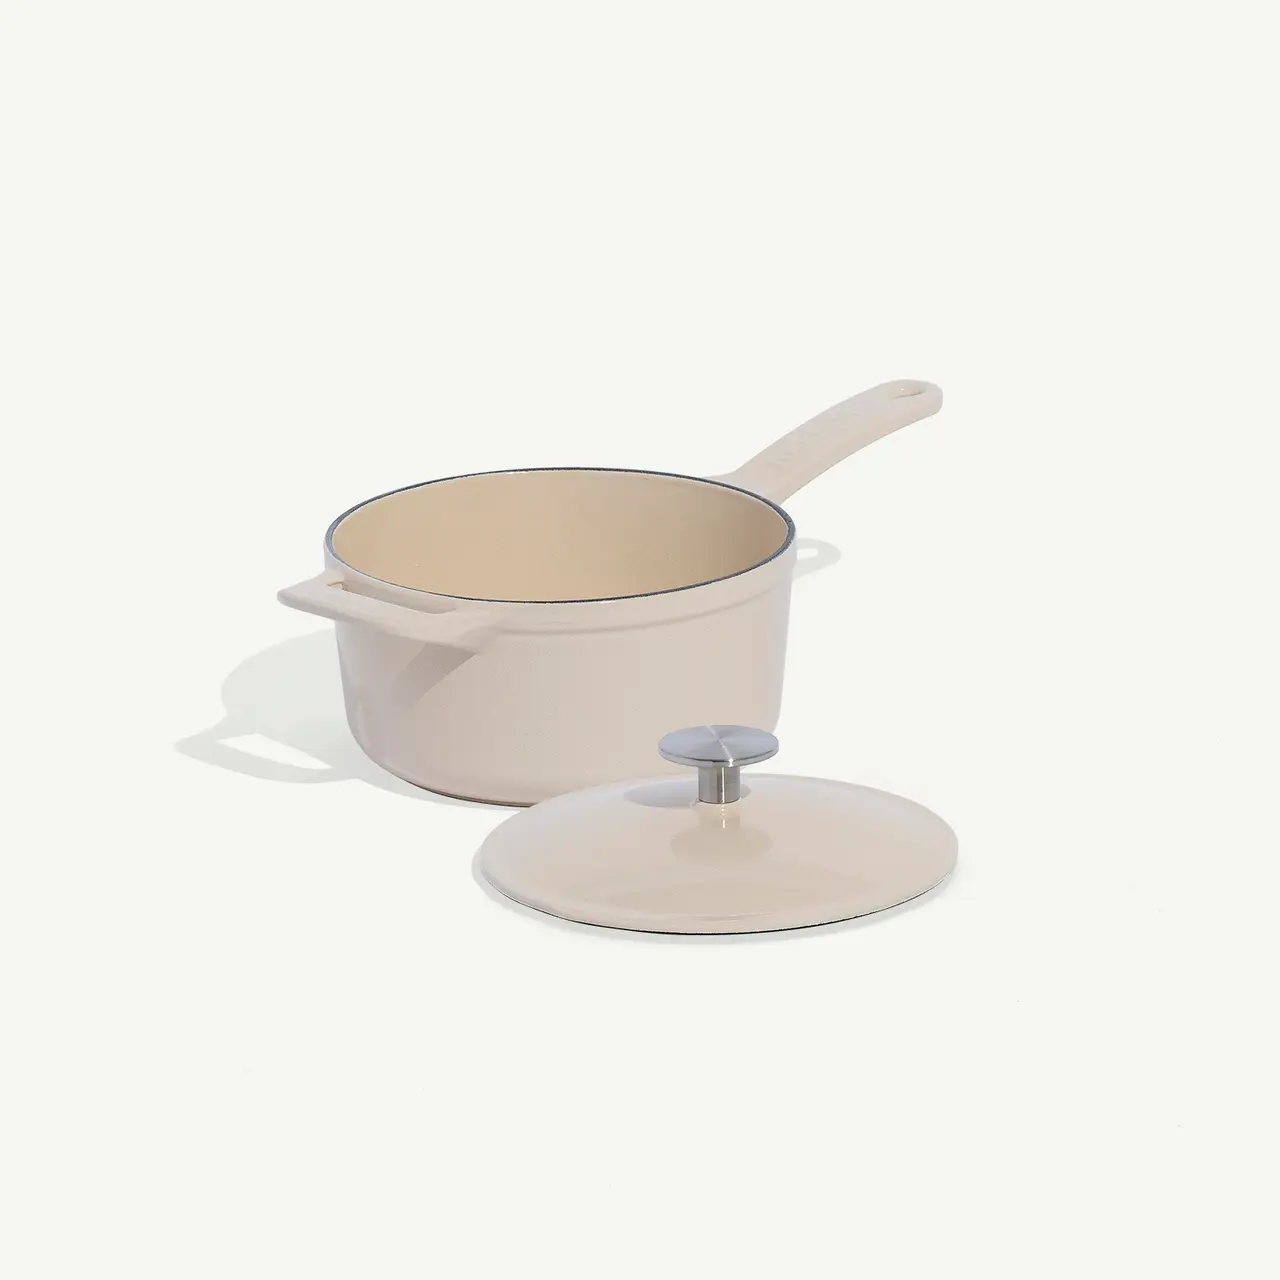 A beige saucepan with a matching lid is set against a plain background.